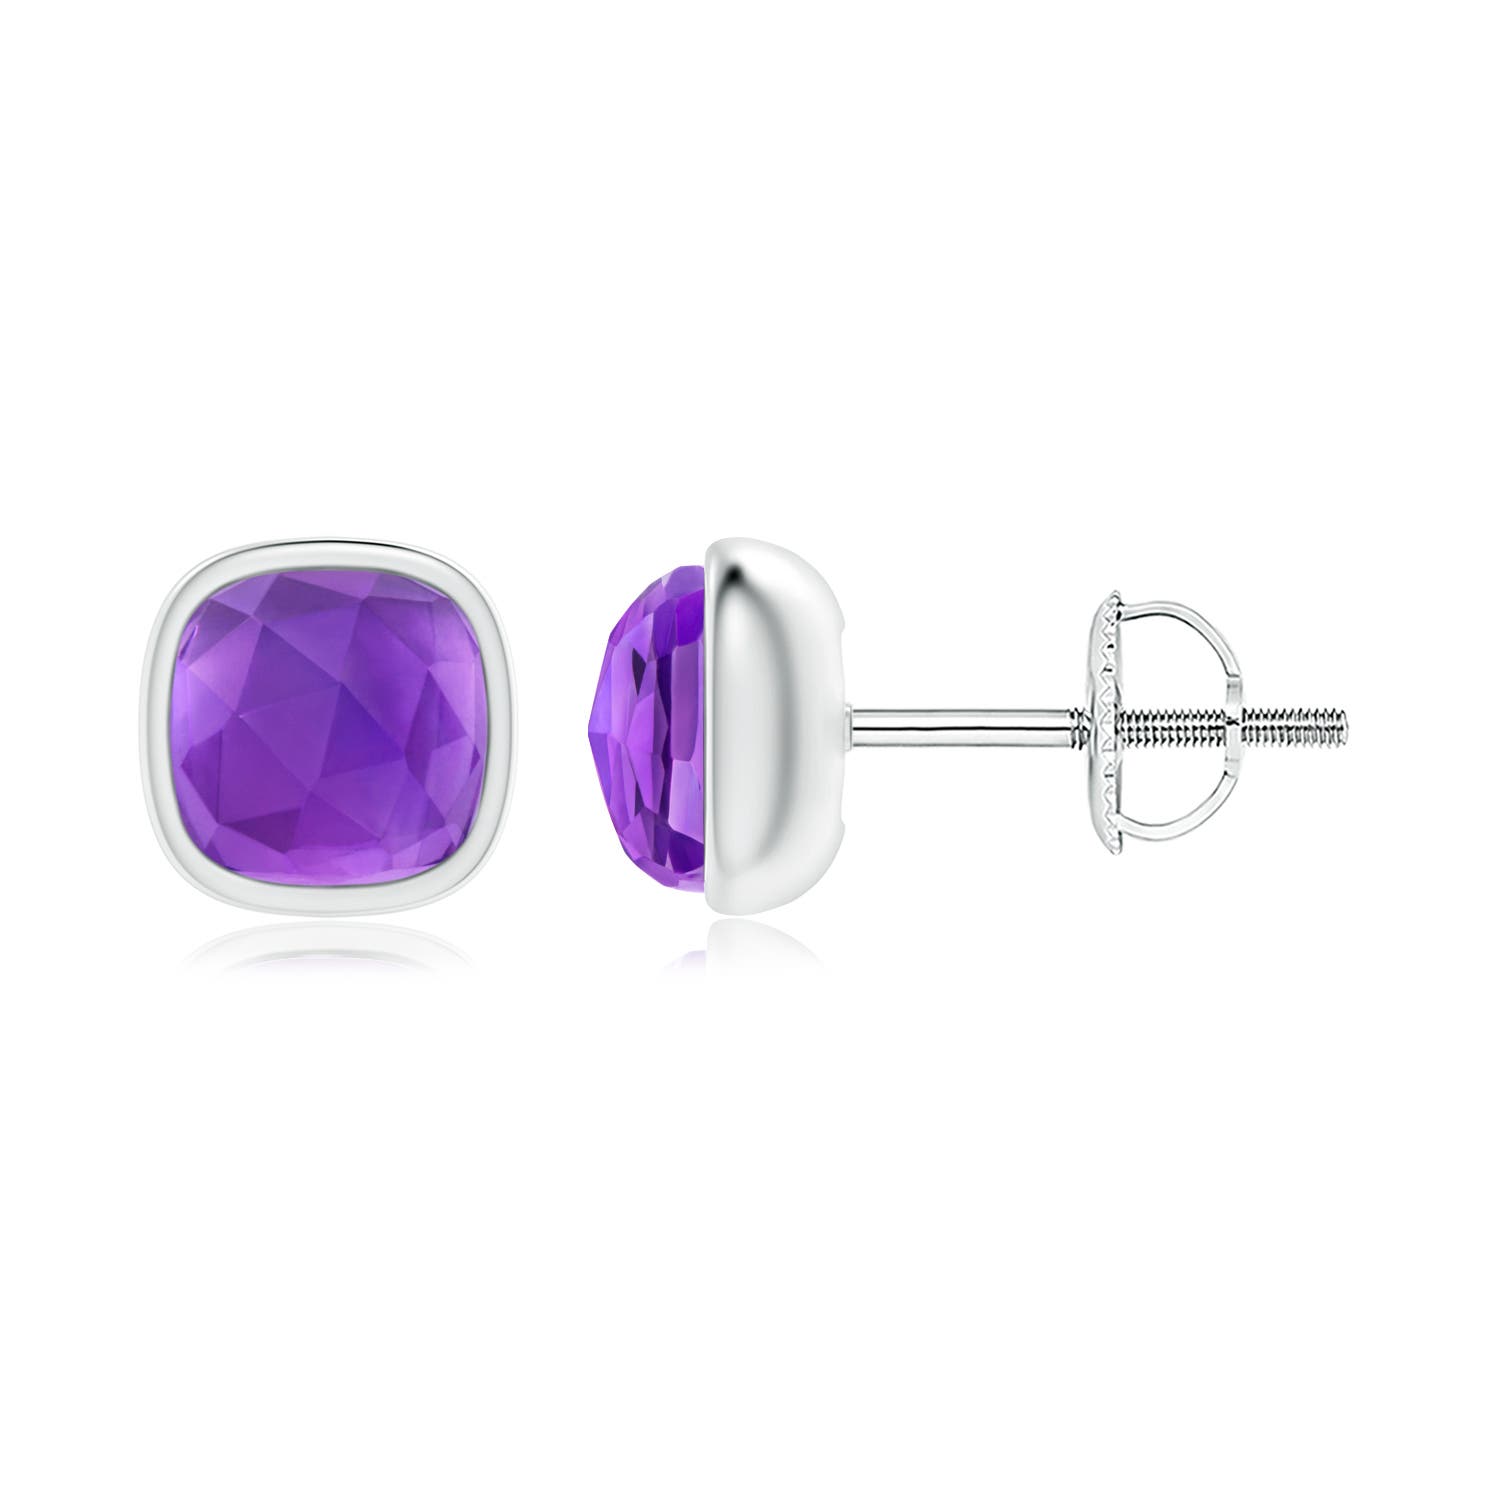 AAA - Amethyst / 1 CT / 14 KT White Gold